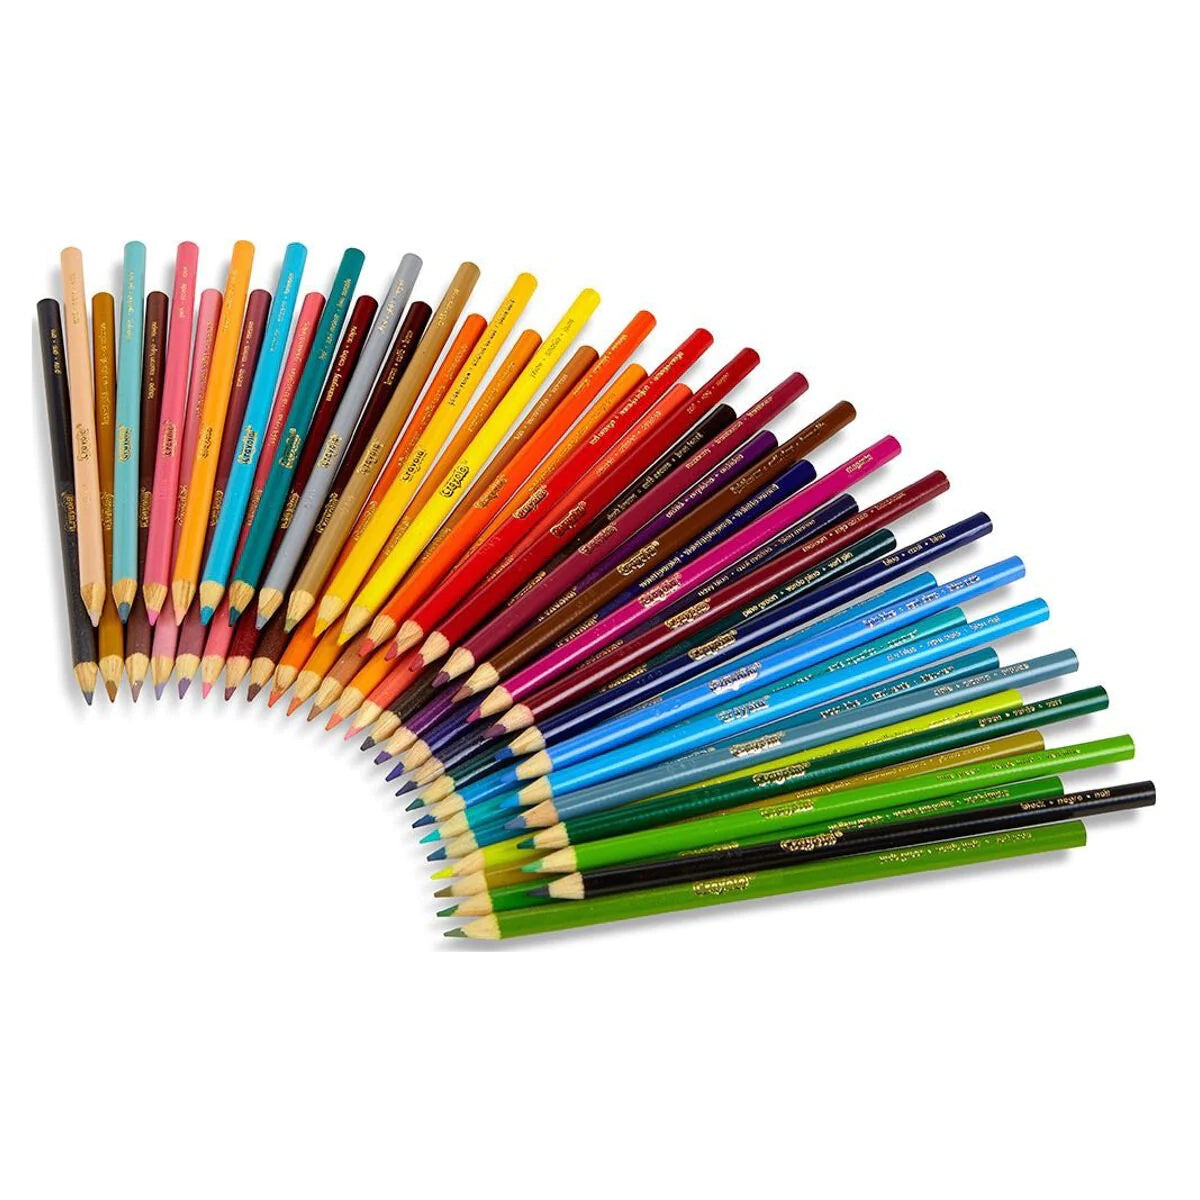 Rainbow Colouring Pencils - 50 Pack